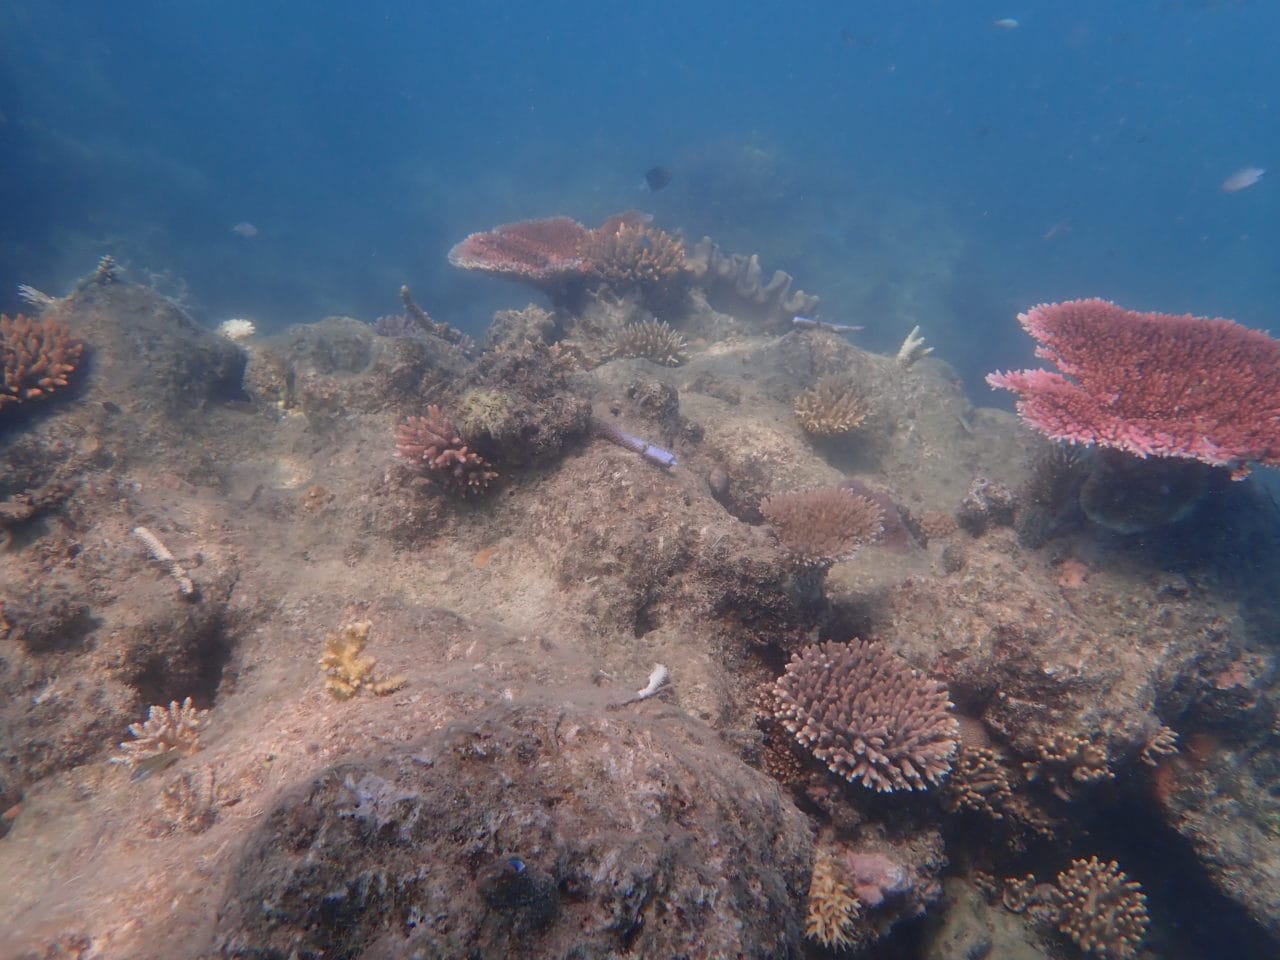 Underwater photo of a coral reef on 16 Apr 20